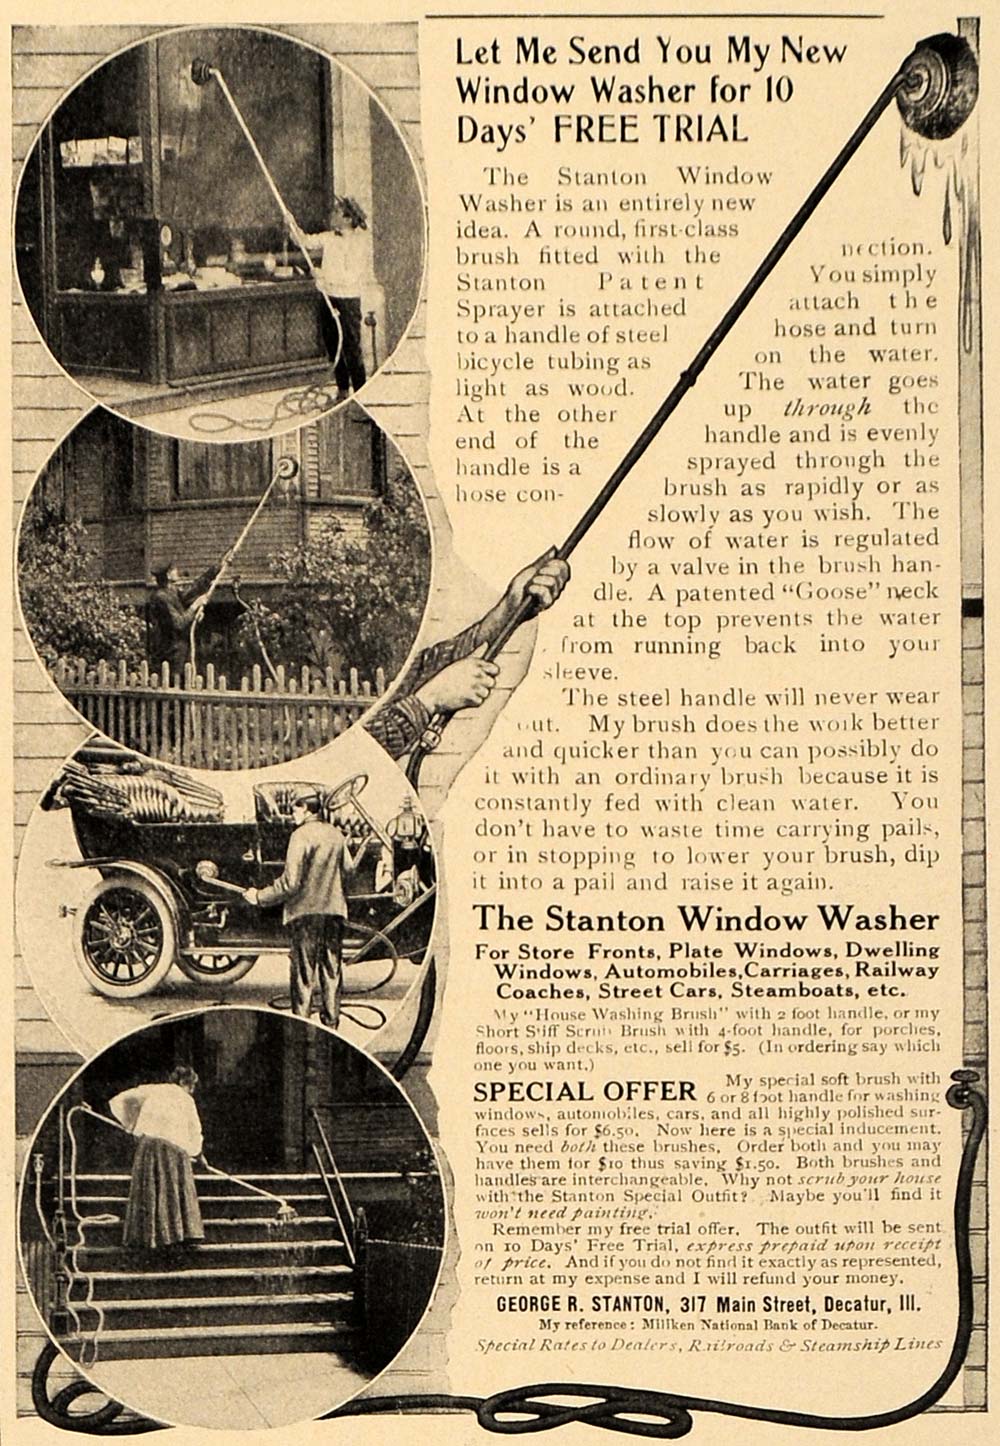 1907 Ad George R. Stanton Window Washer Free Trial - ORIGINAL ADVERTISING CL9